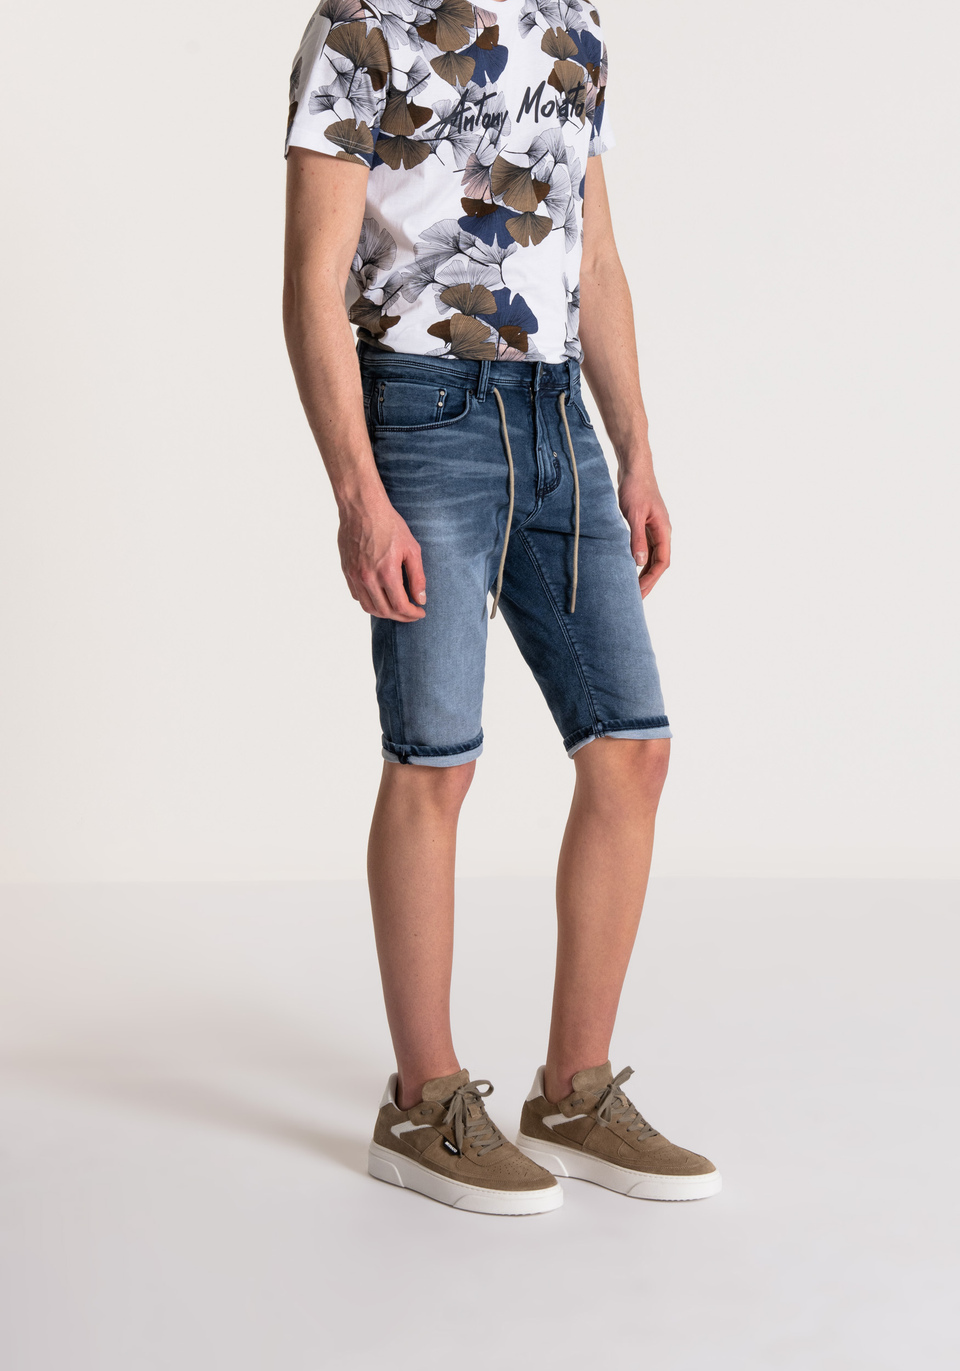 CARROT-FLEX-FIT “JOY” USED-EFFECT SHORTS WITH A DARK WASH - Antony Morato Online Shop